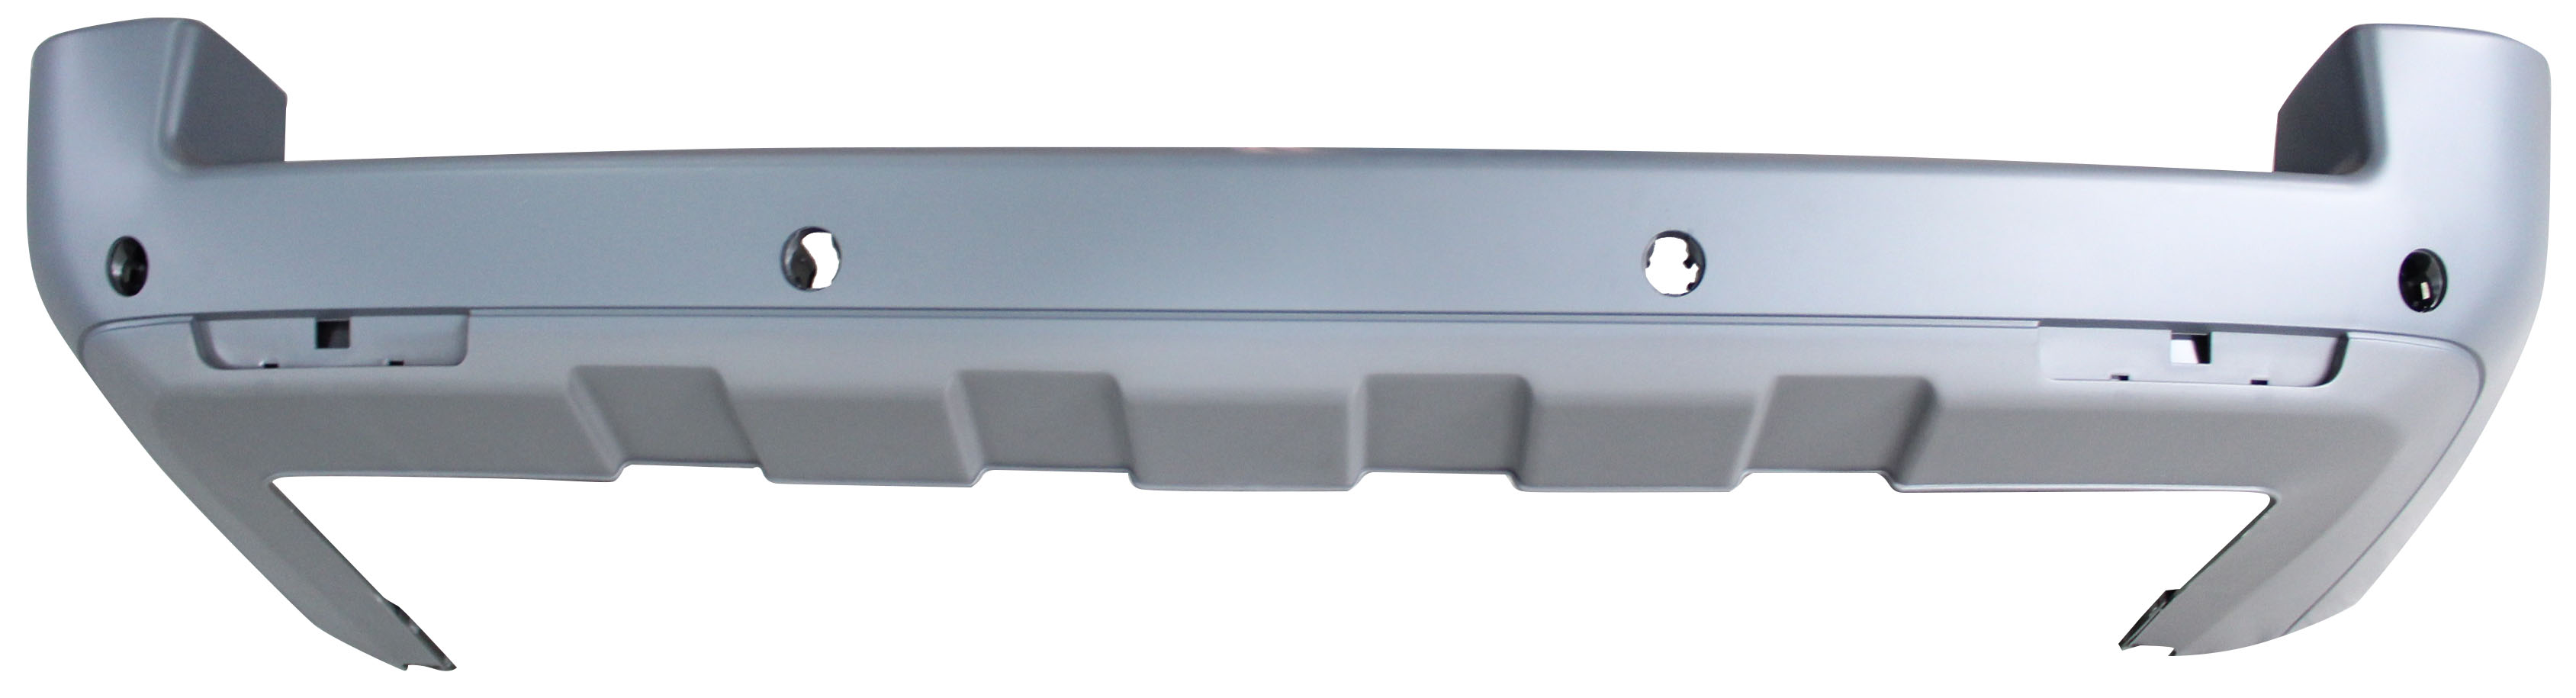 Aftermarket BUMPER COVERS for LAND ROVER - RANGE ROVER, RANGE ROVER,03-09,Rear bumper cover